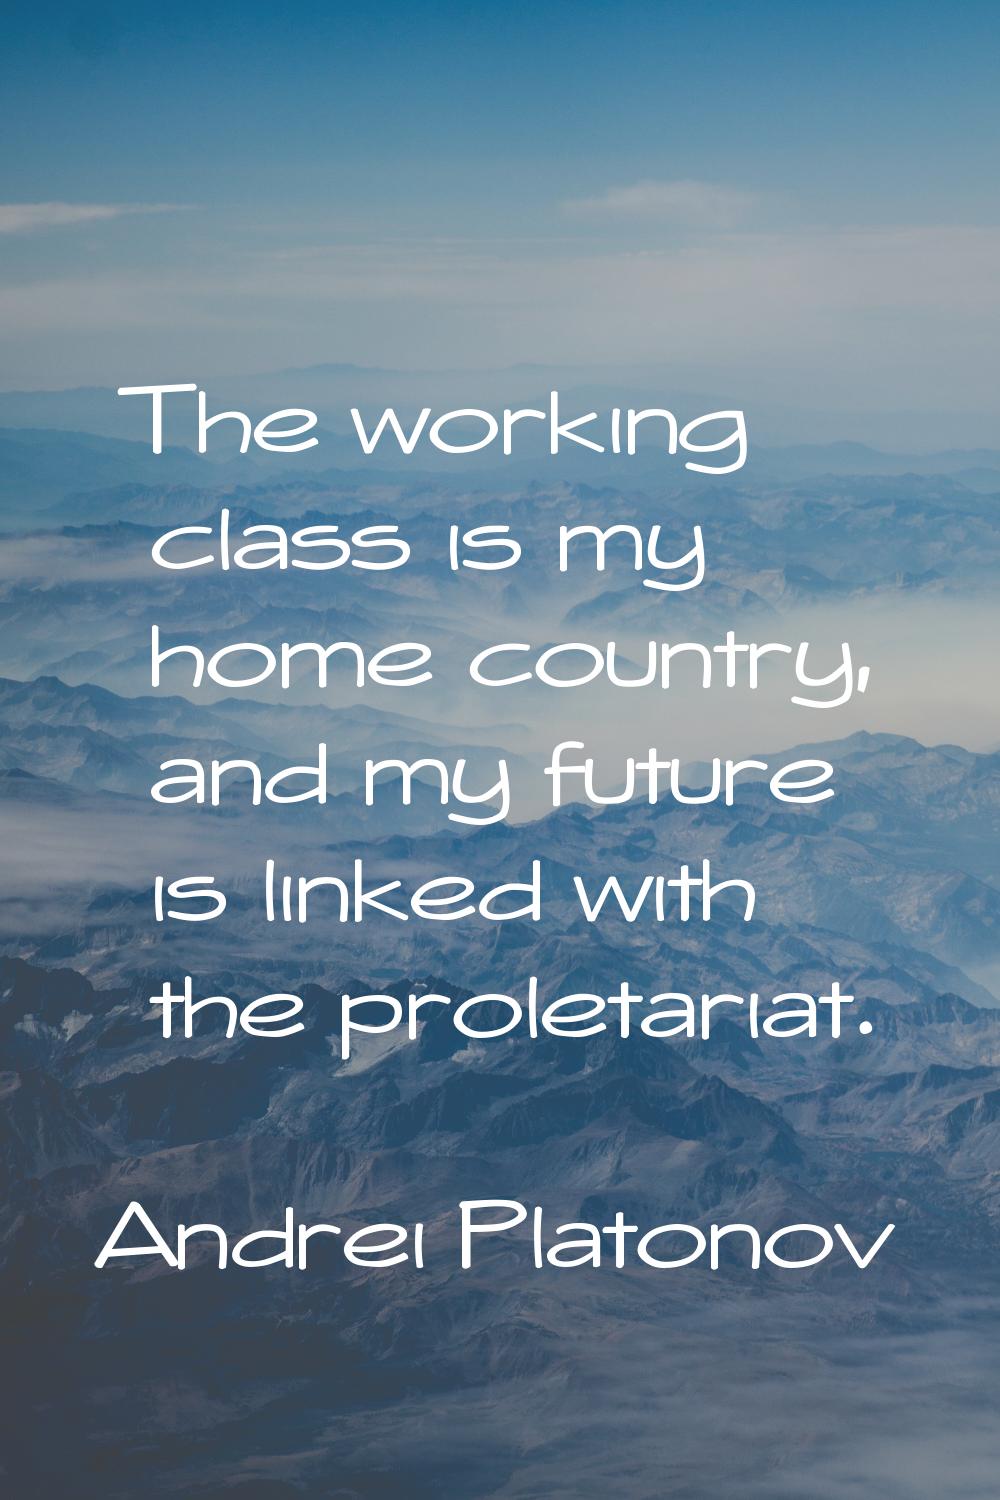 The working class is my home country, and my future is linked with the proletariat.